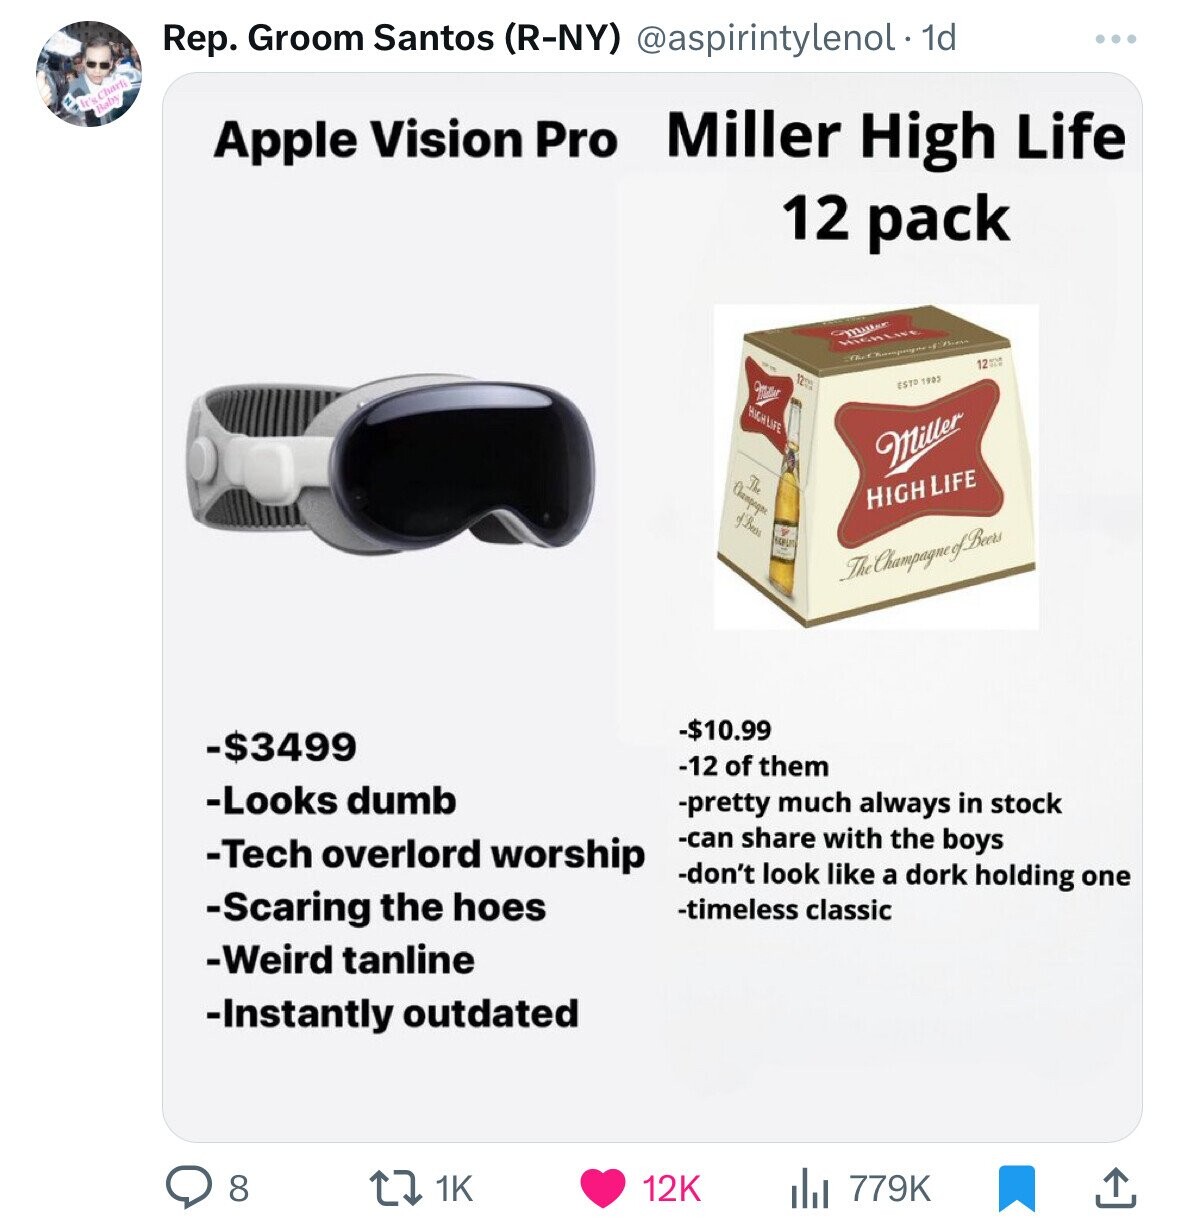 Rep. Groom Santos RNy . 1d Apple Vision Pro Miller High Life 12 pack $3499 Looks dumb Tech overlord worship Scaring the hoes Weird tanline Instantly outdated 8 Ci 1K Onder 12K High Life Th. Champagne Habuit 12 mu Highlive The thumping Esto 1903 Miller Hig